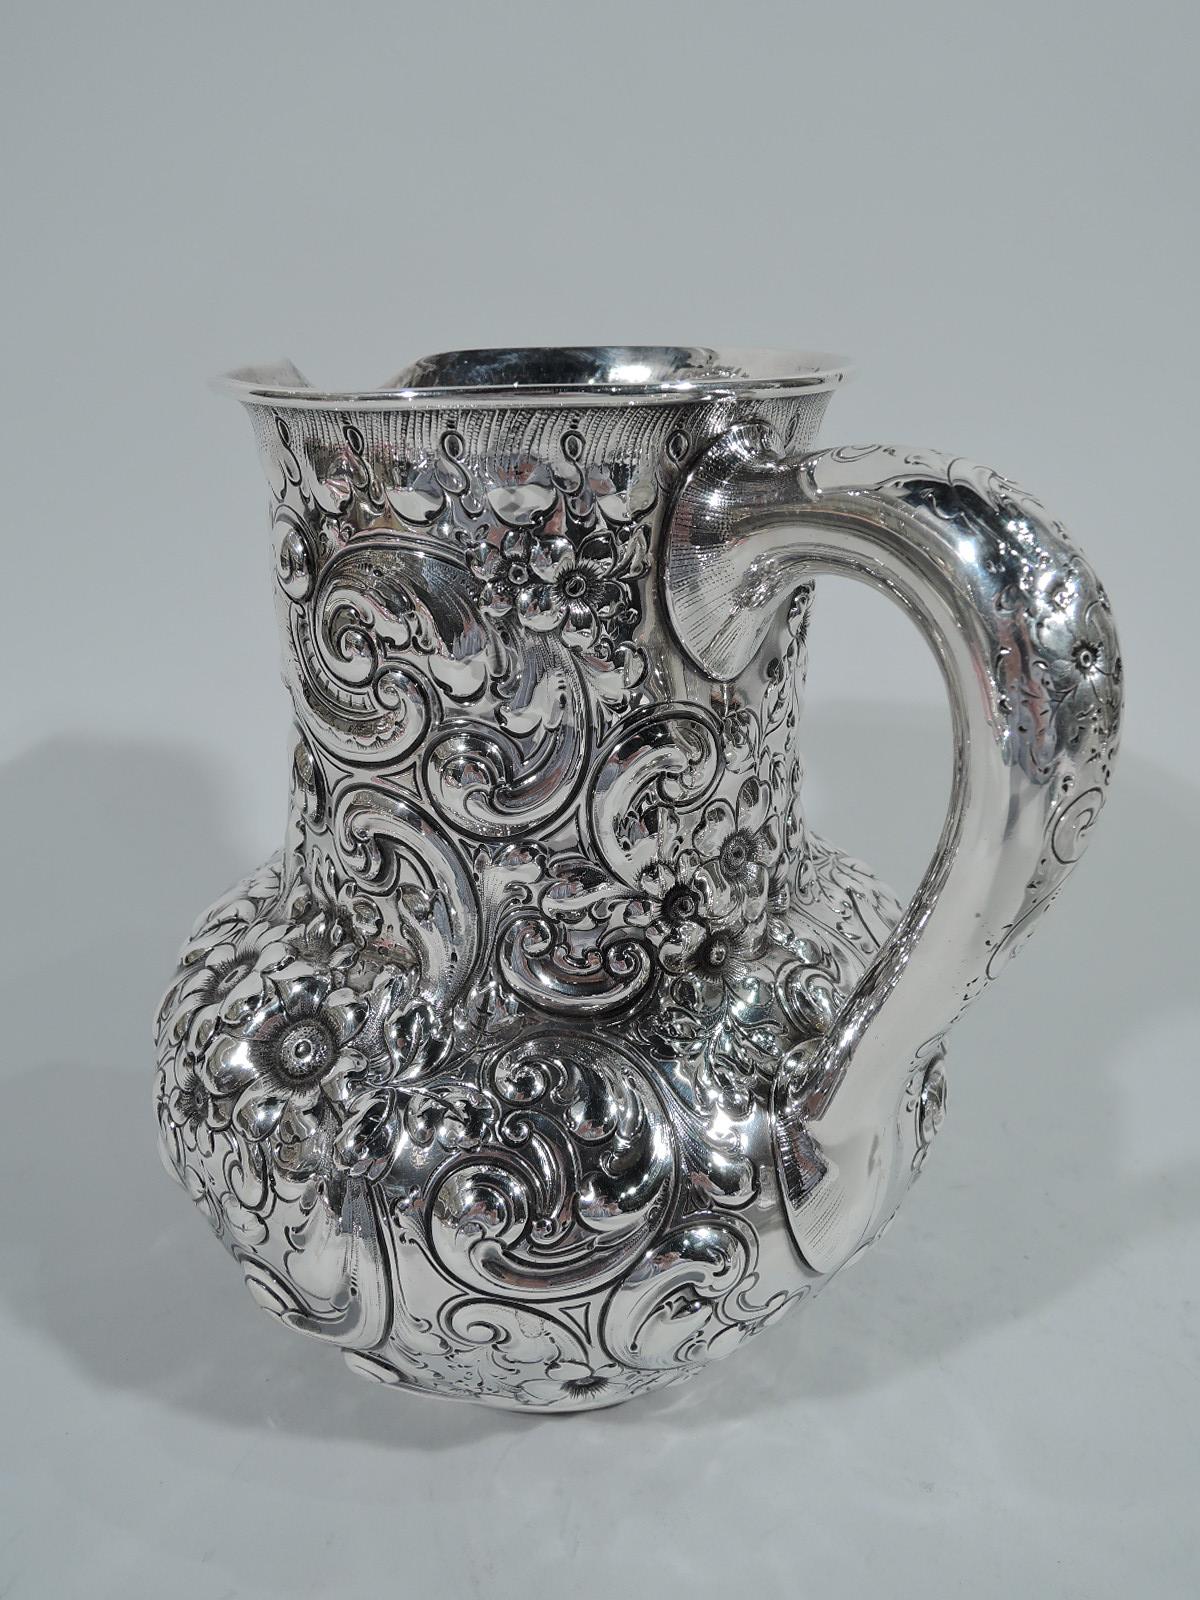 Victorian sterling silver water pitcher. Made by Theodore B. Starr in New York, circa 1880. Globular with drum-form neck, small lip spout, and scroll handle. Allover repousse flowers, foliage, and scrolls. Pretty and tactile. Interlaced script